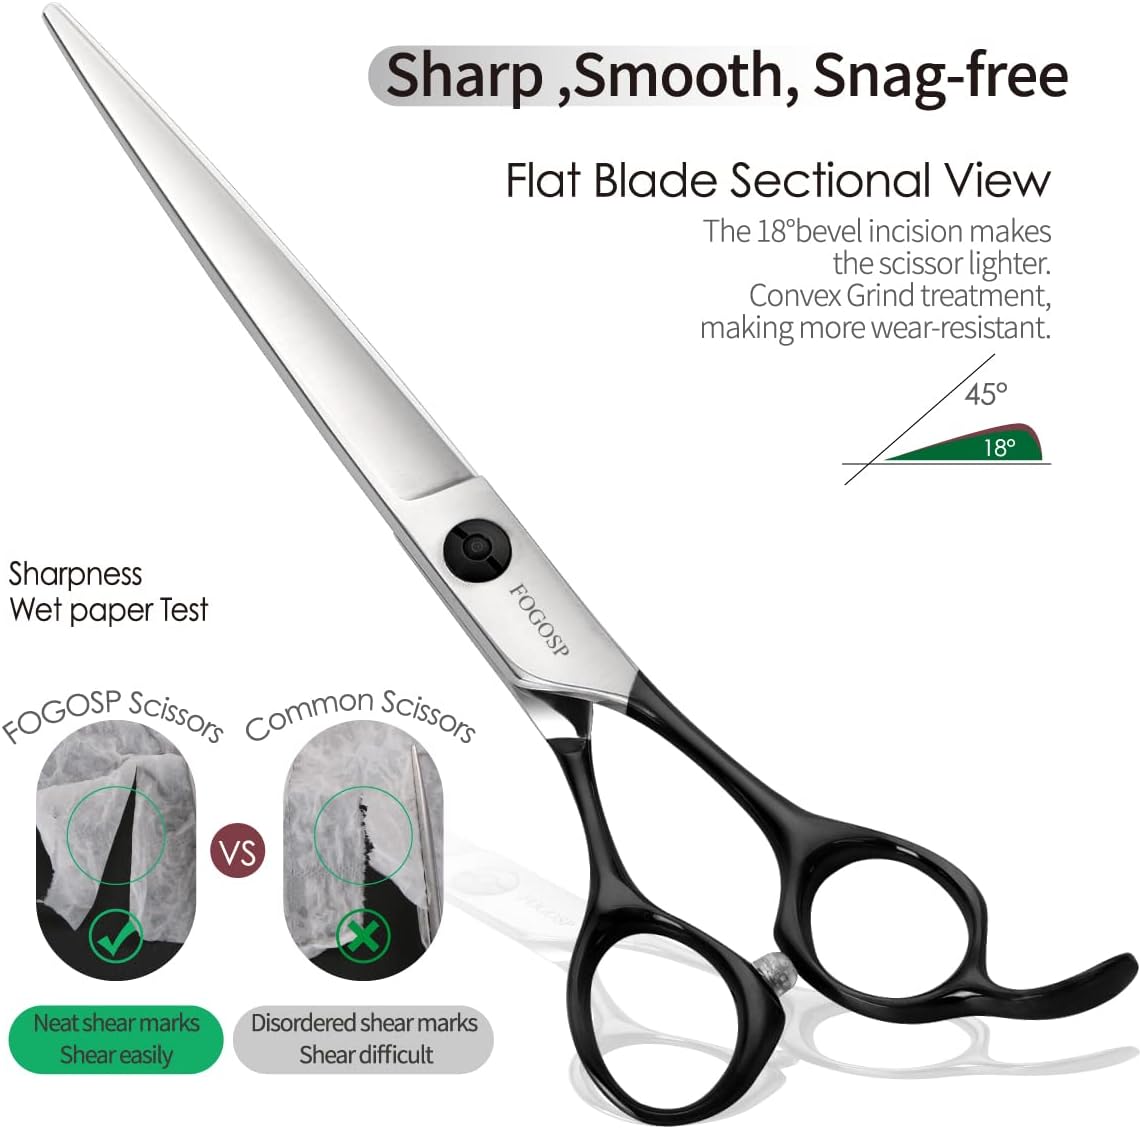 FOGOSP Professional Dog Grooming Scissors: The Perfect Tool for Efficient and Comfortable Pet Grooming